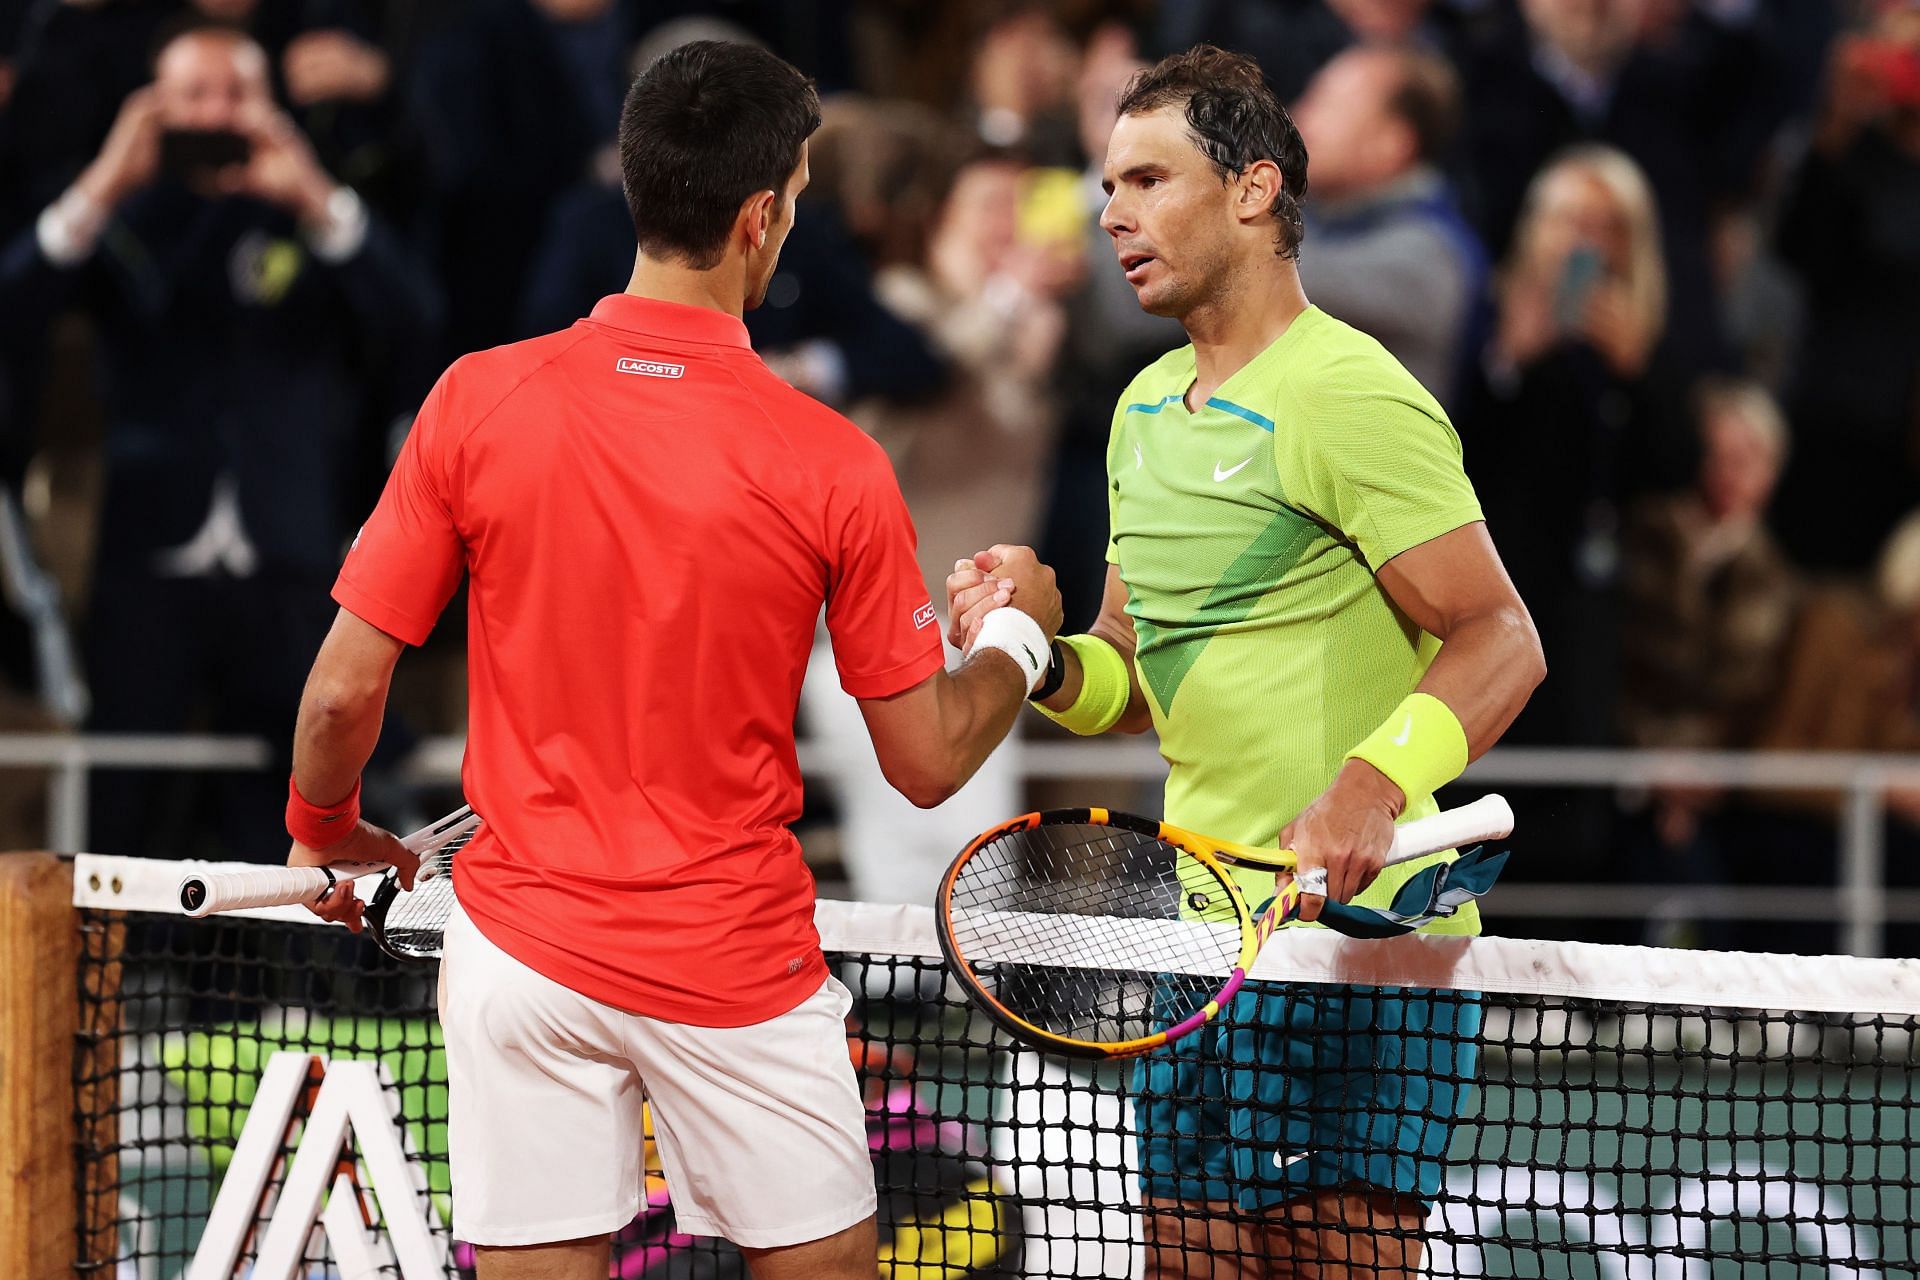 The two tennis legends last faced each other at the 2022 French Open.